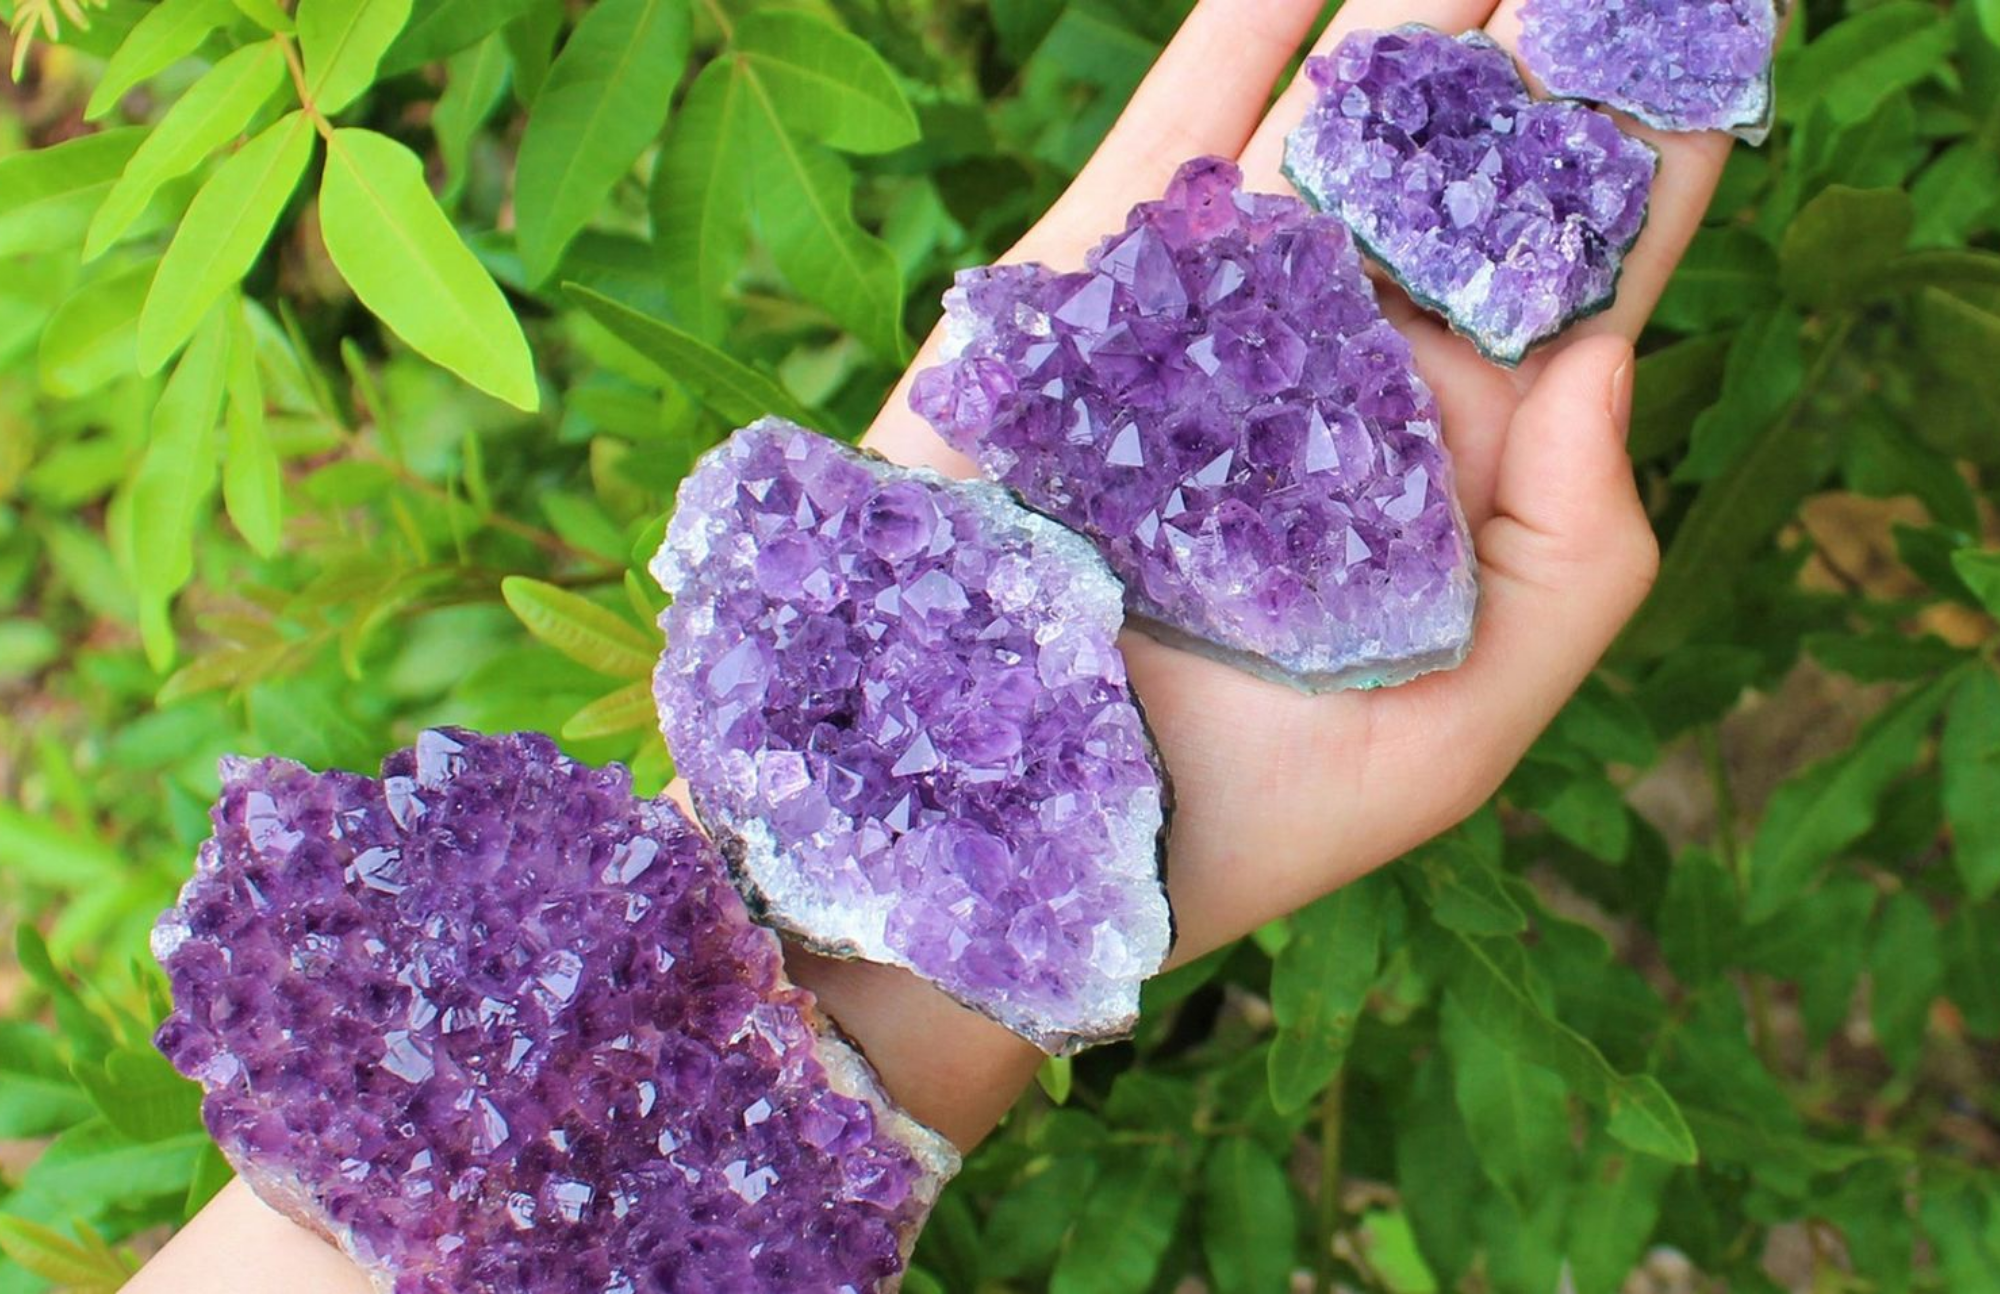 Five amethyst stones on a woman's hand with leaves in the background